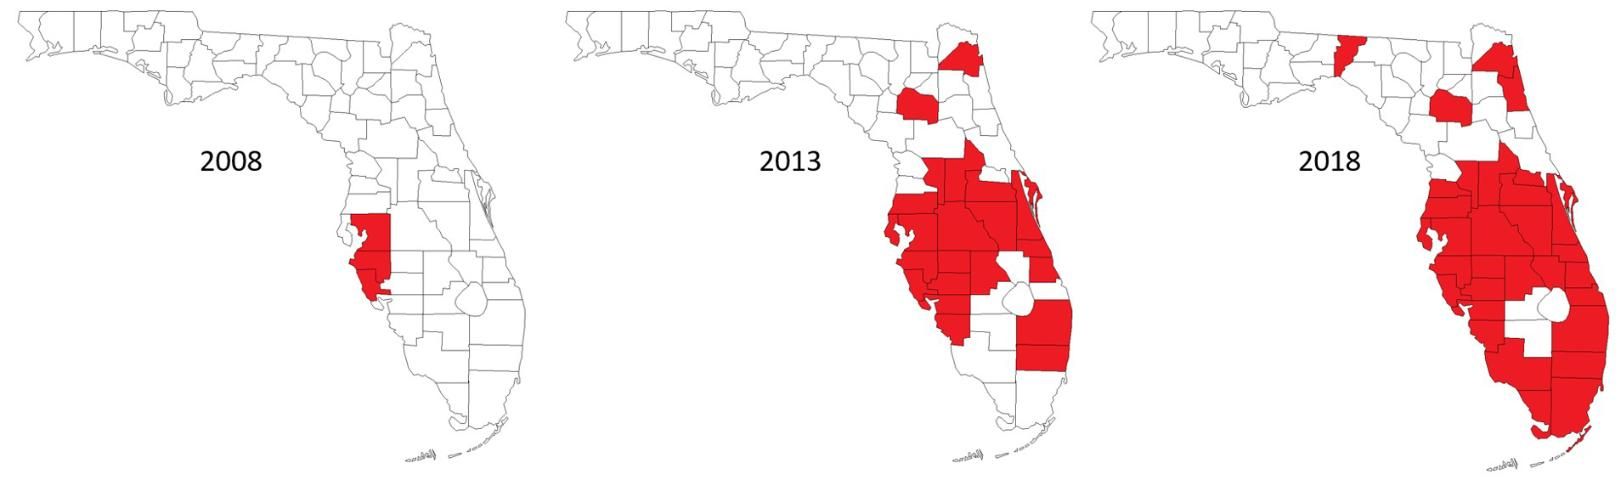 Figure 5. Historical and current distribution of LBD in the state of Florida.